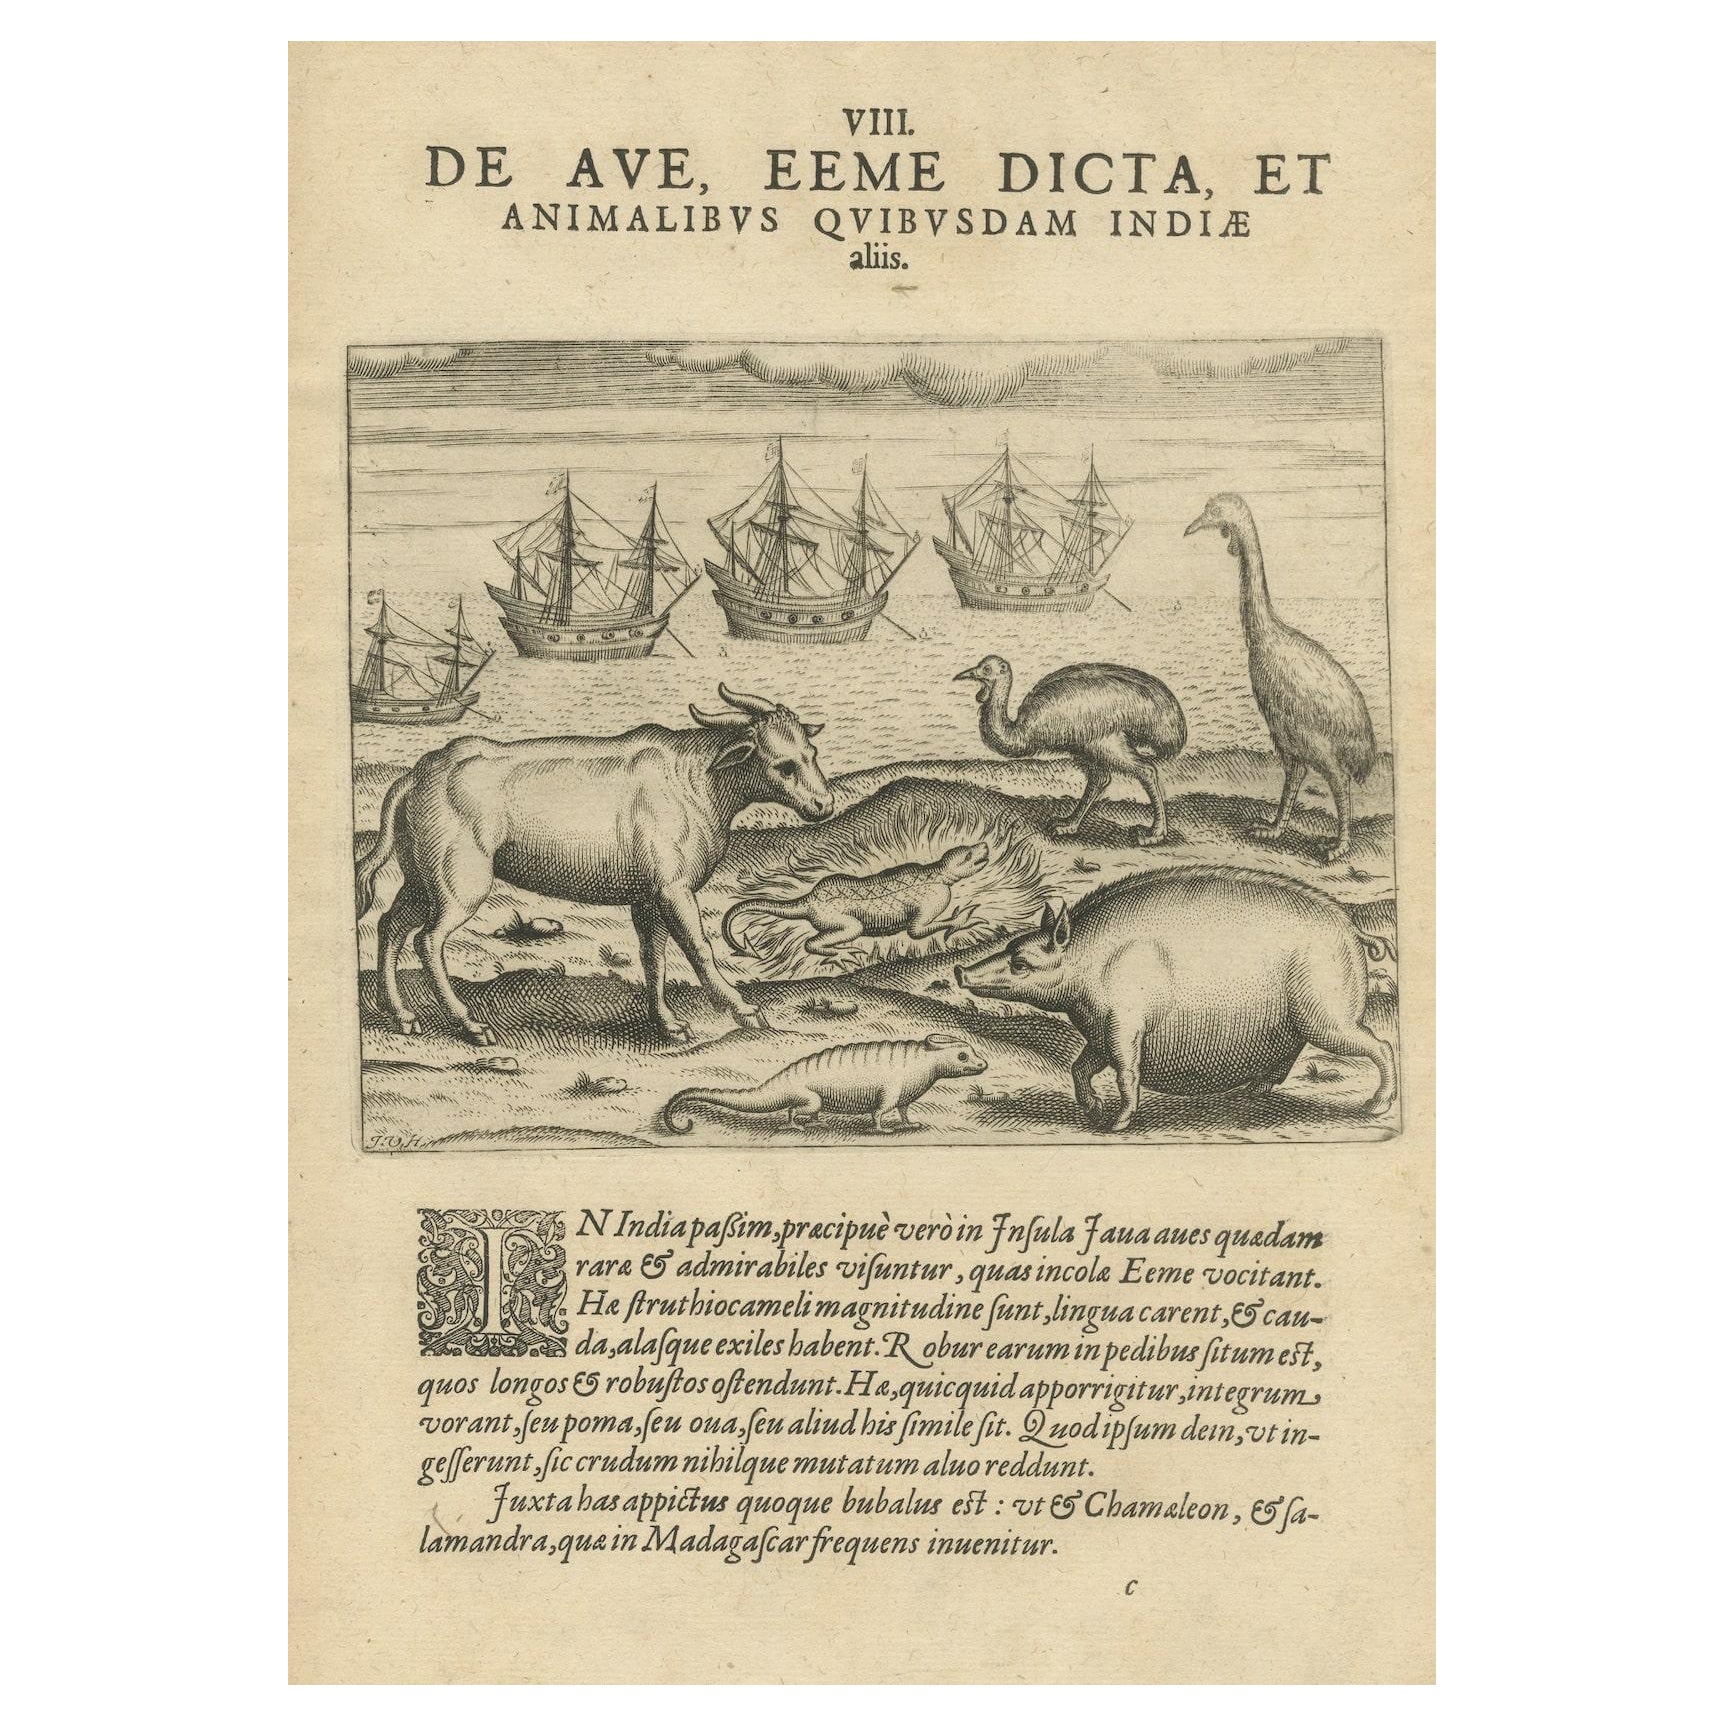 Rare Creatures of the East: A 1601 de Bry Copper Engraving from the Indies